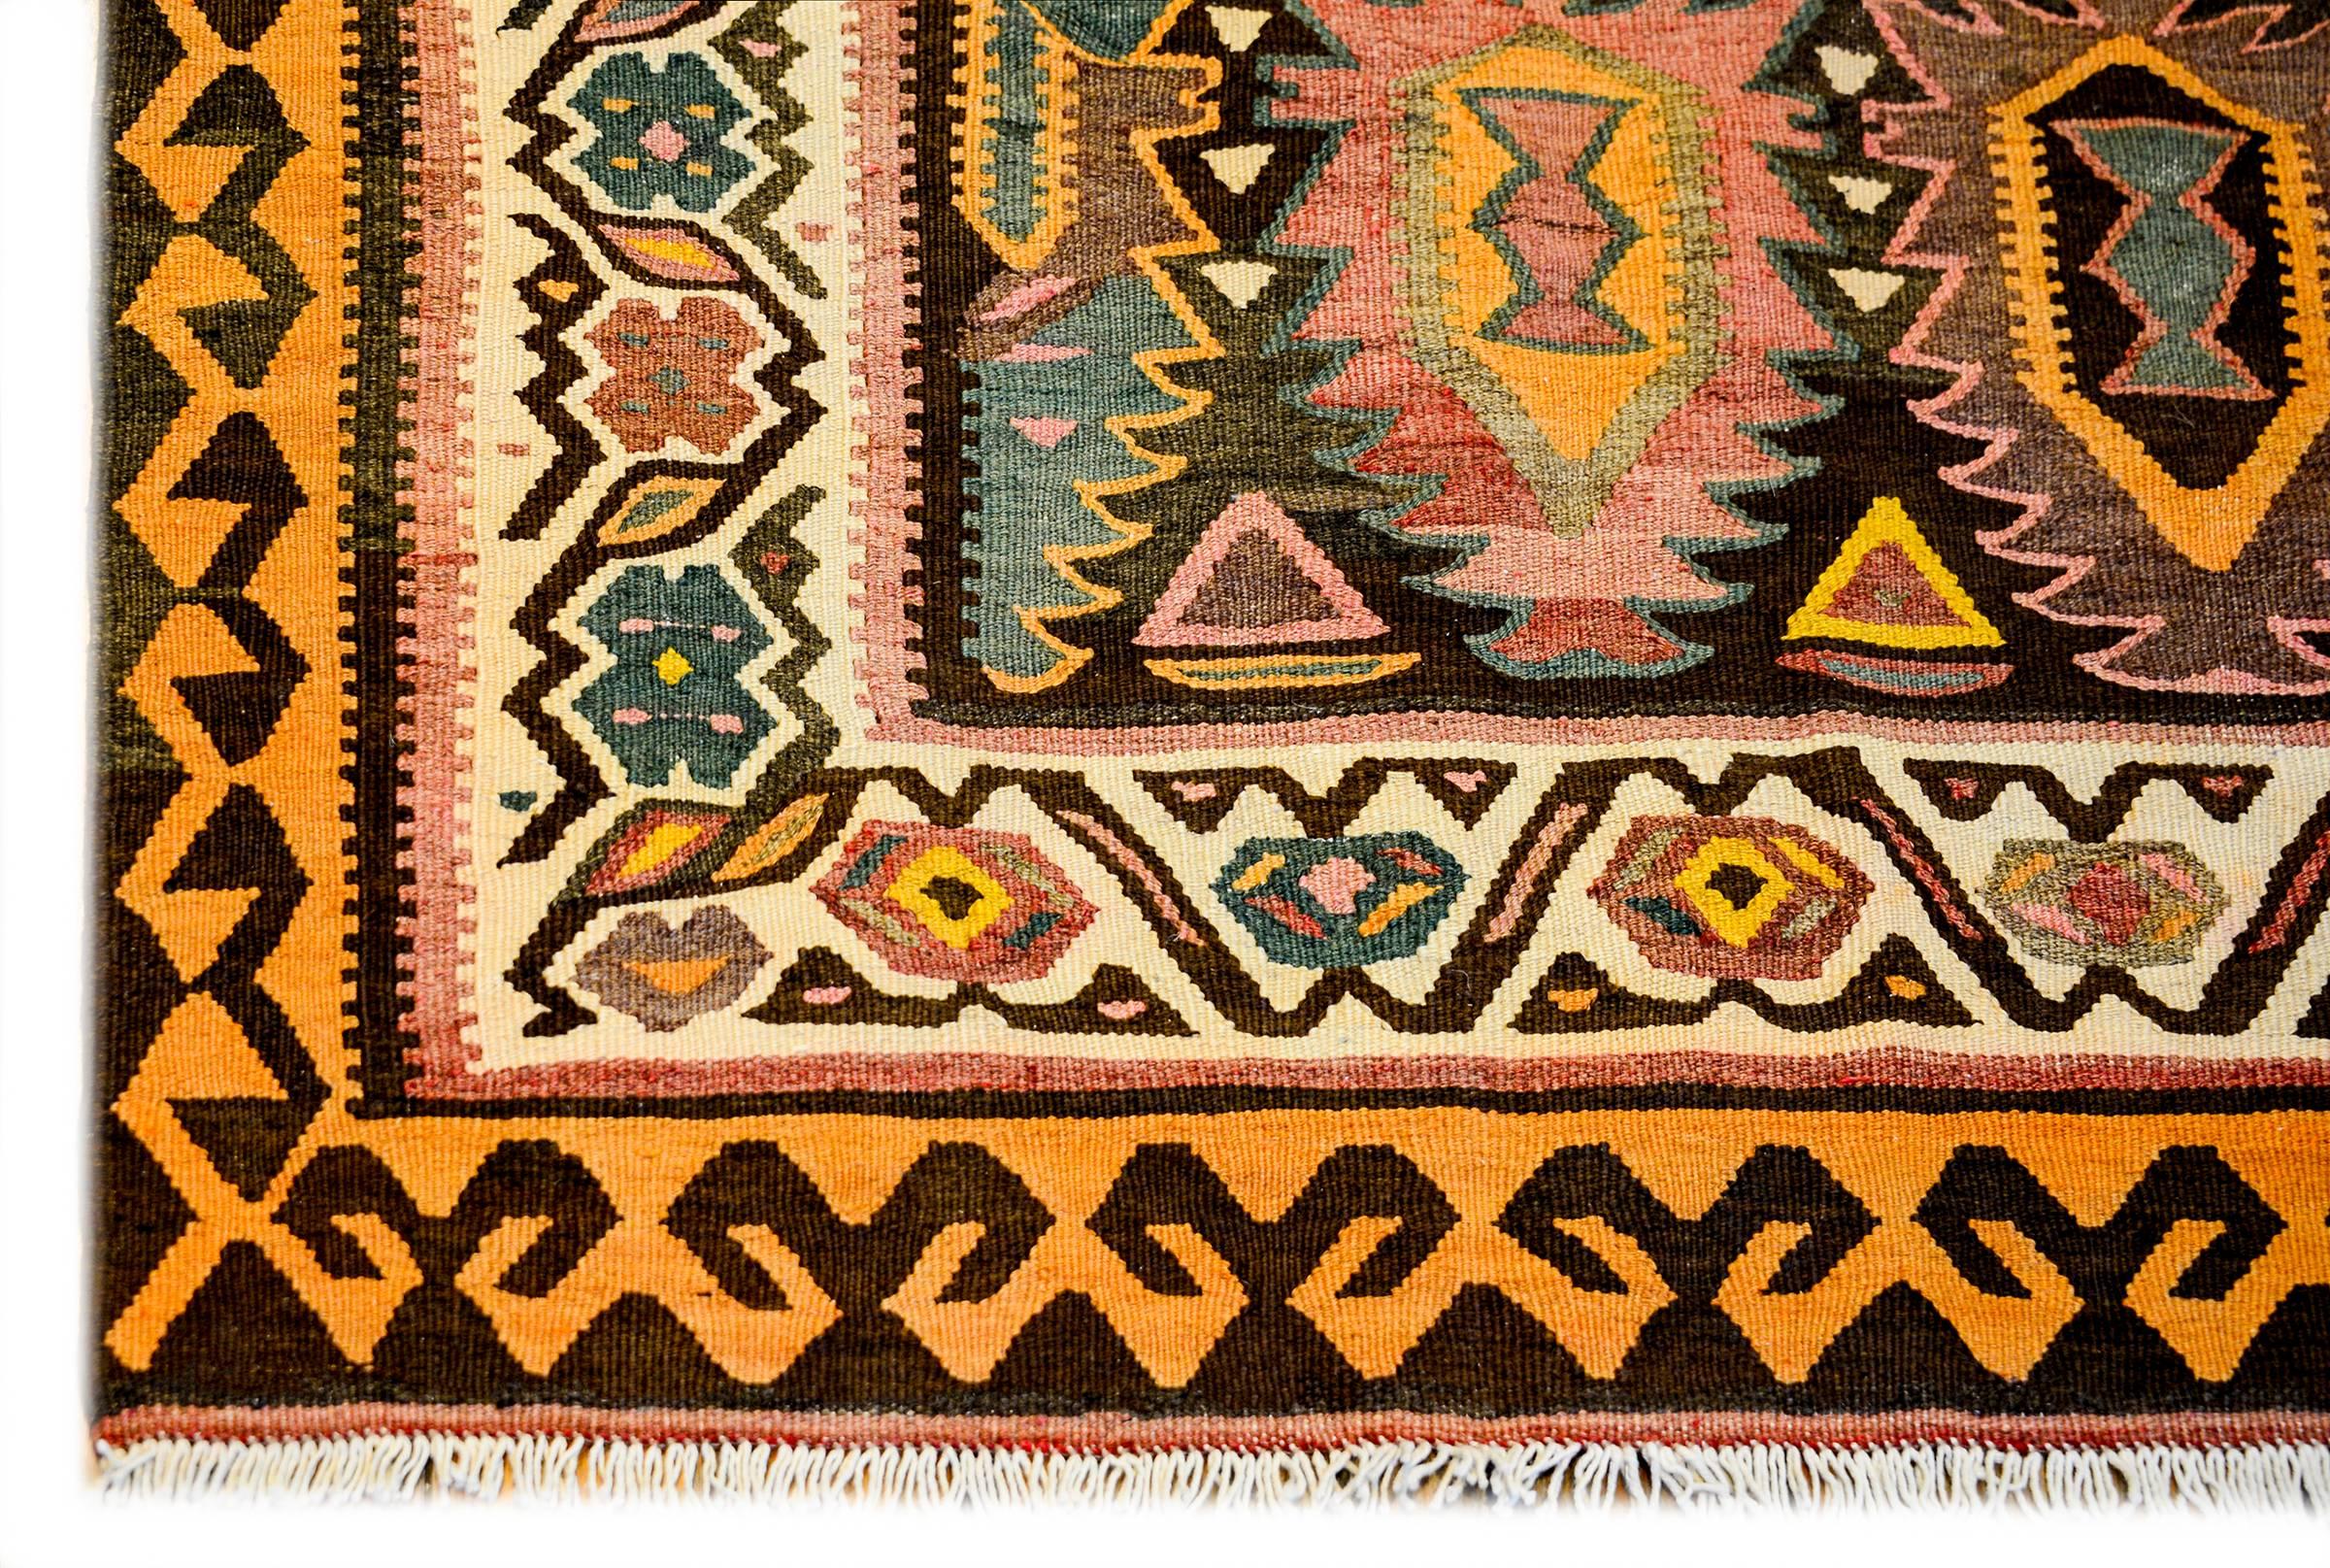 A beautiful early 20th century Persian Qazvin Kilim rug with a rare all-over orange, purple, black, crimson, pink and white tree-of-life pattern surrounded by multiple geometric patterned borders. The inner border is white with multicolored stylized